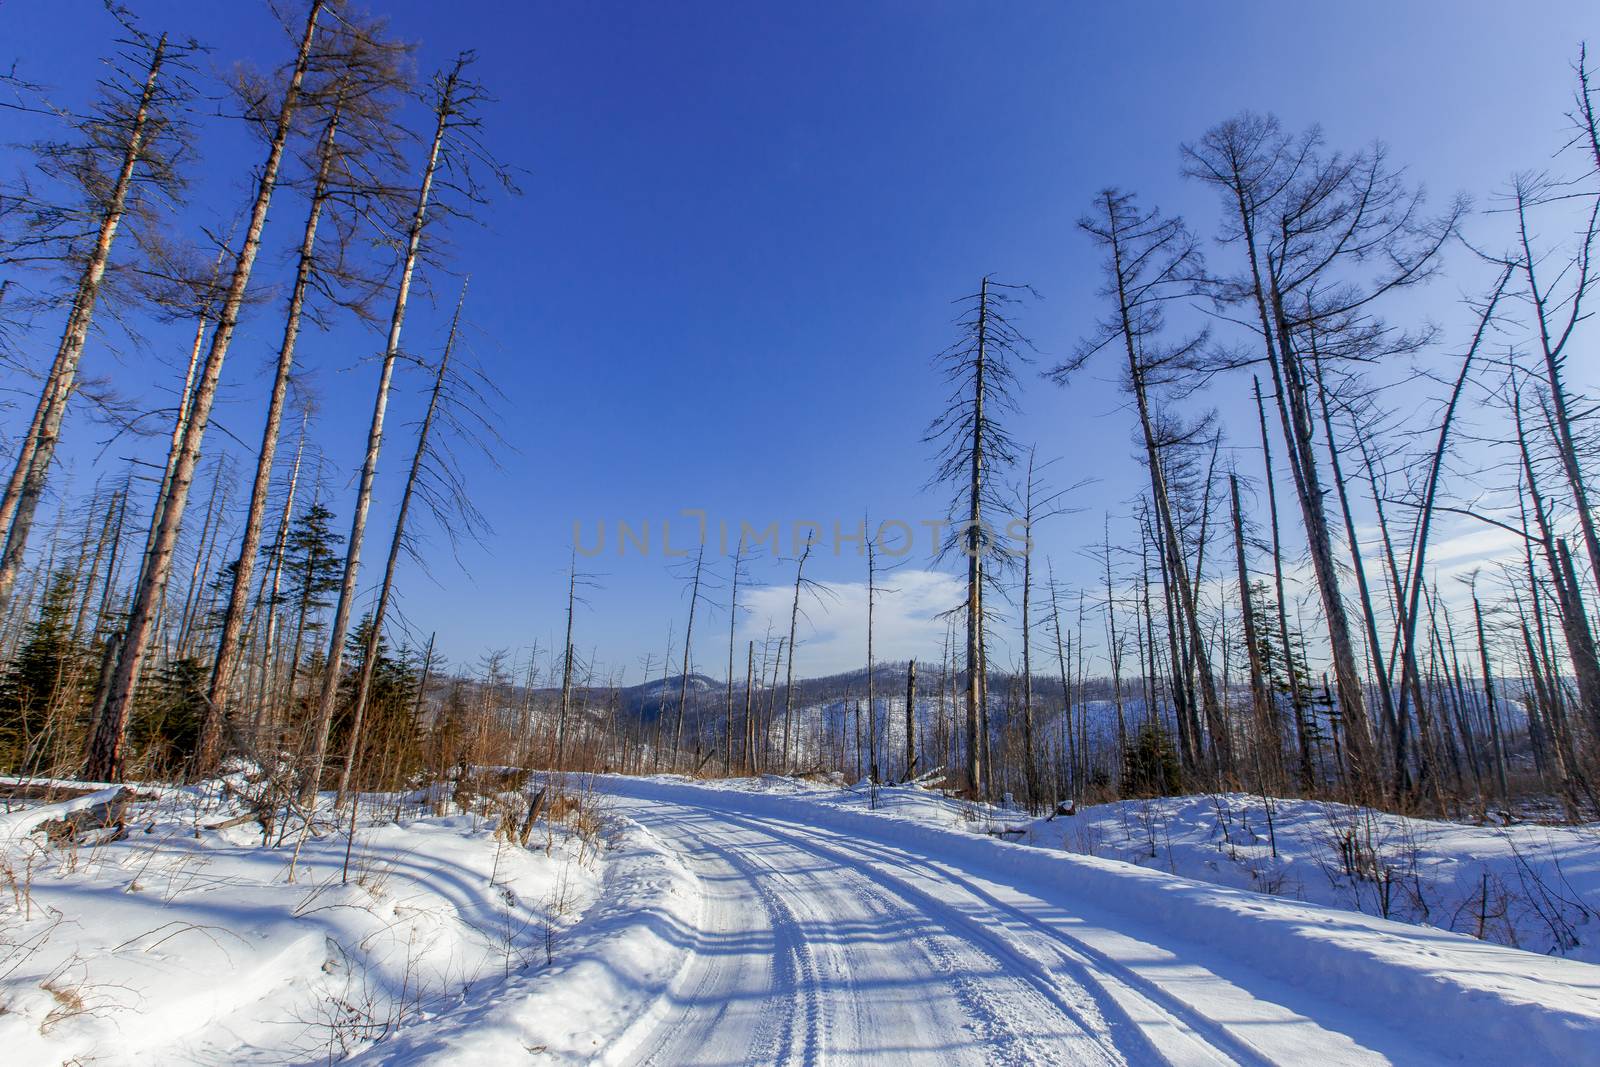 The snow-covered road passes by tall coniferous trees